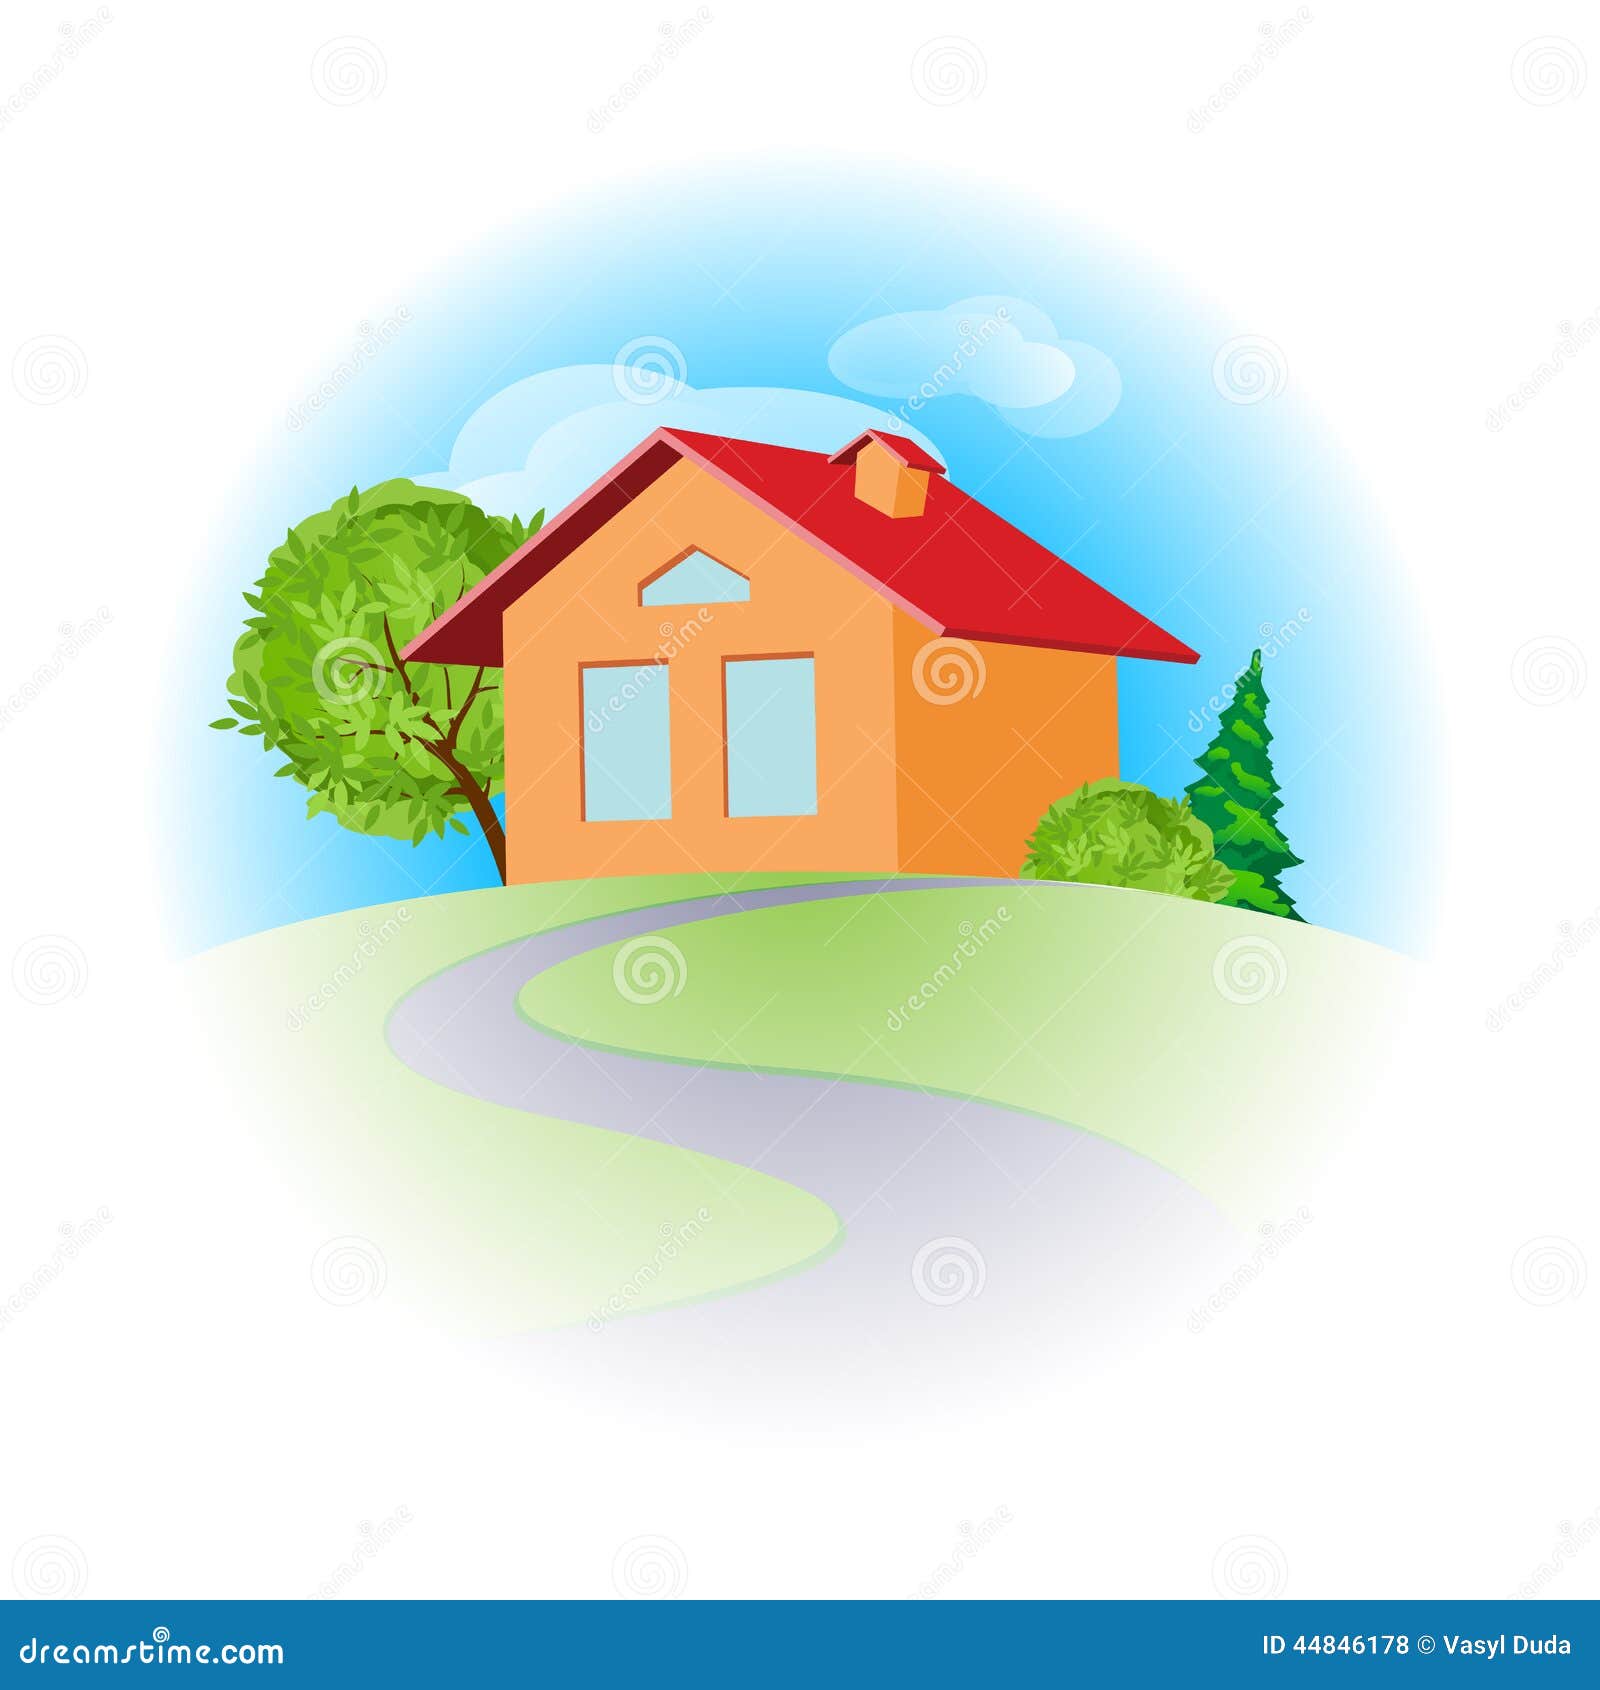 Home Sweet Home stock vector. Illustration of abstract - 44846178